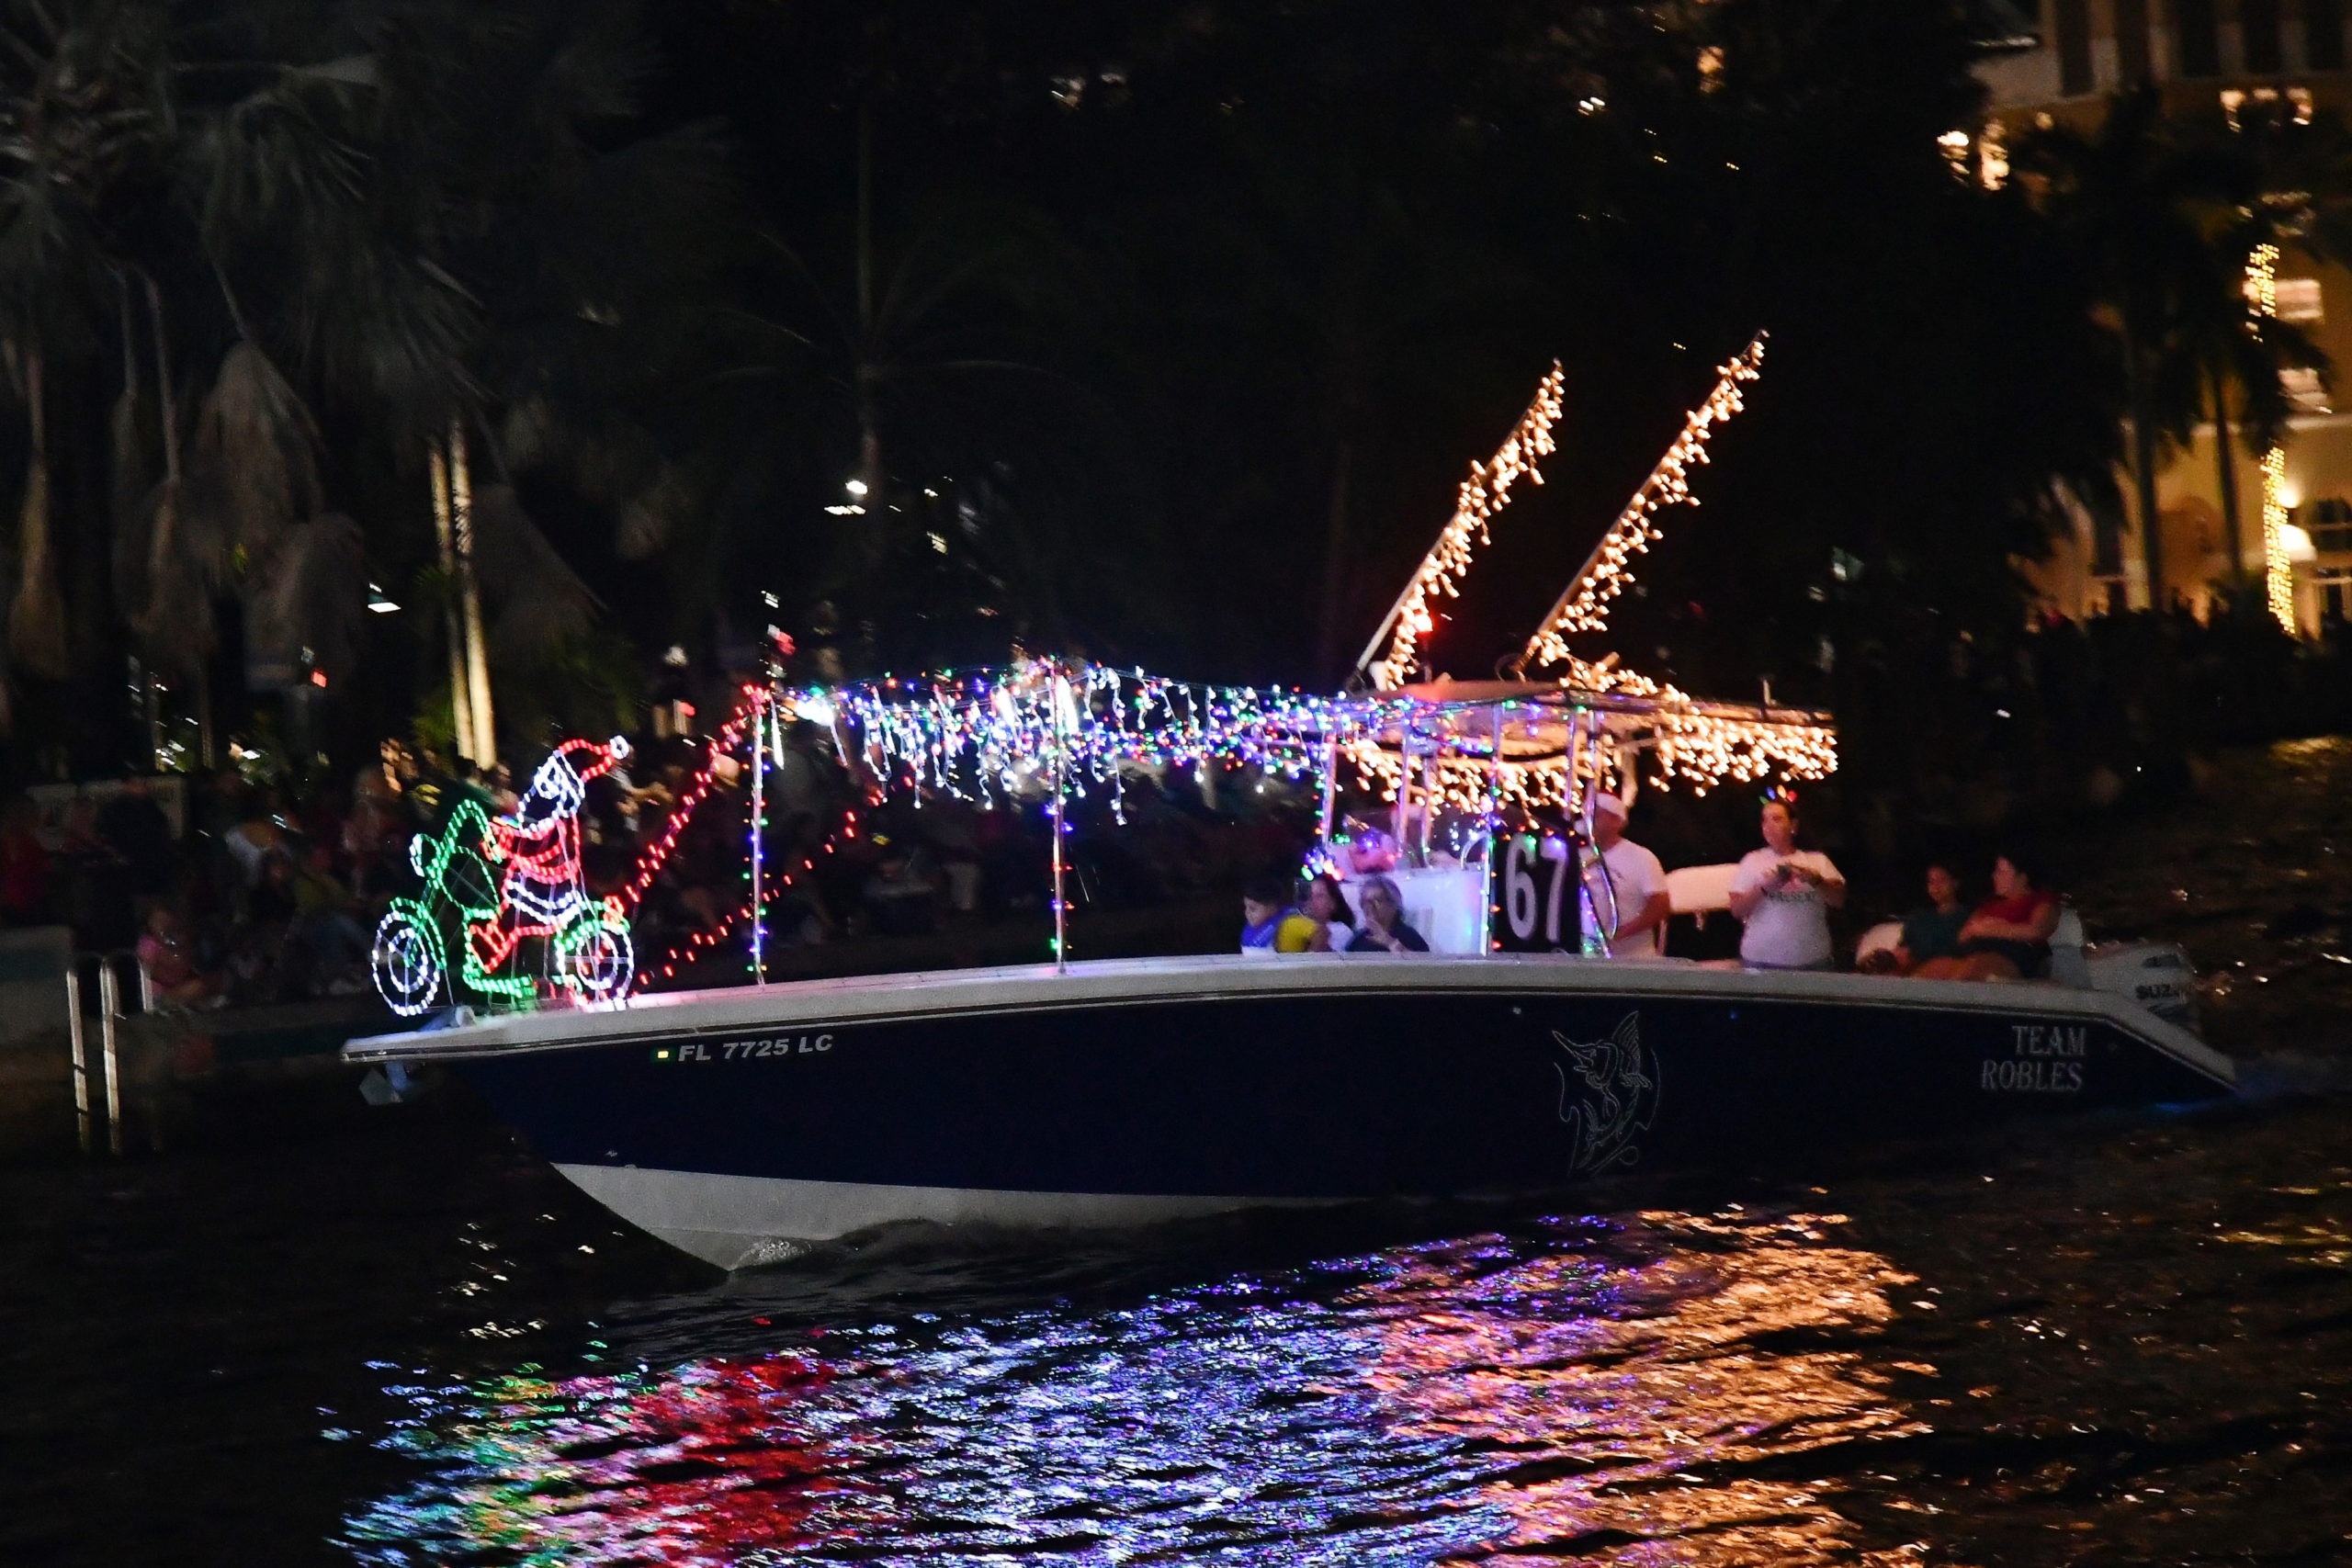 Team Robles, boat number 67 in the 2022 Winterfest Boat Parade